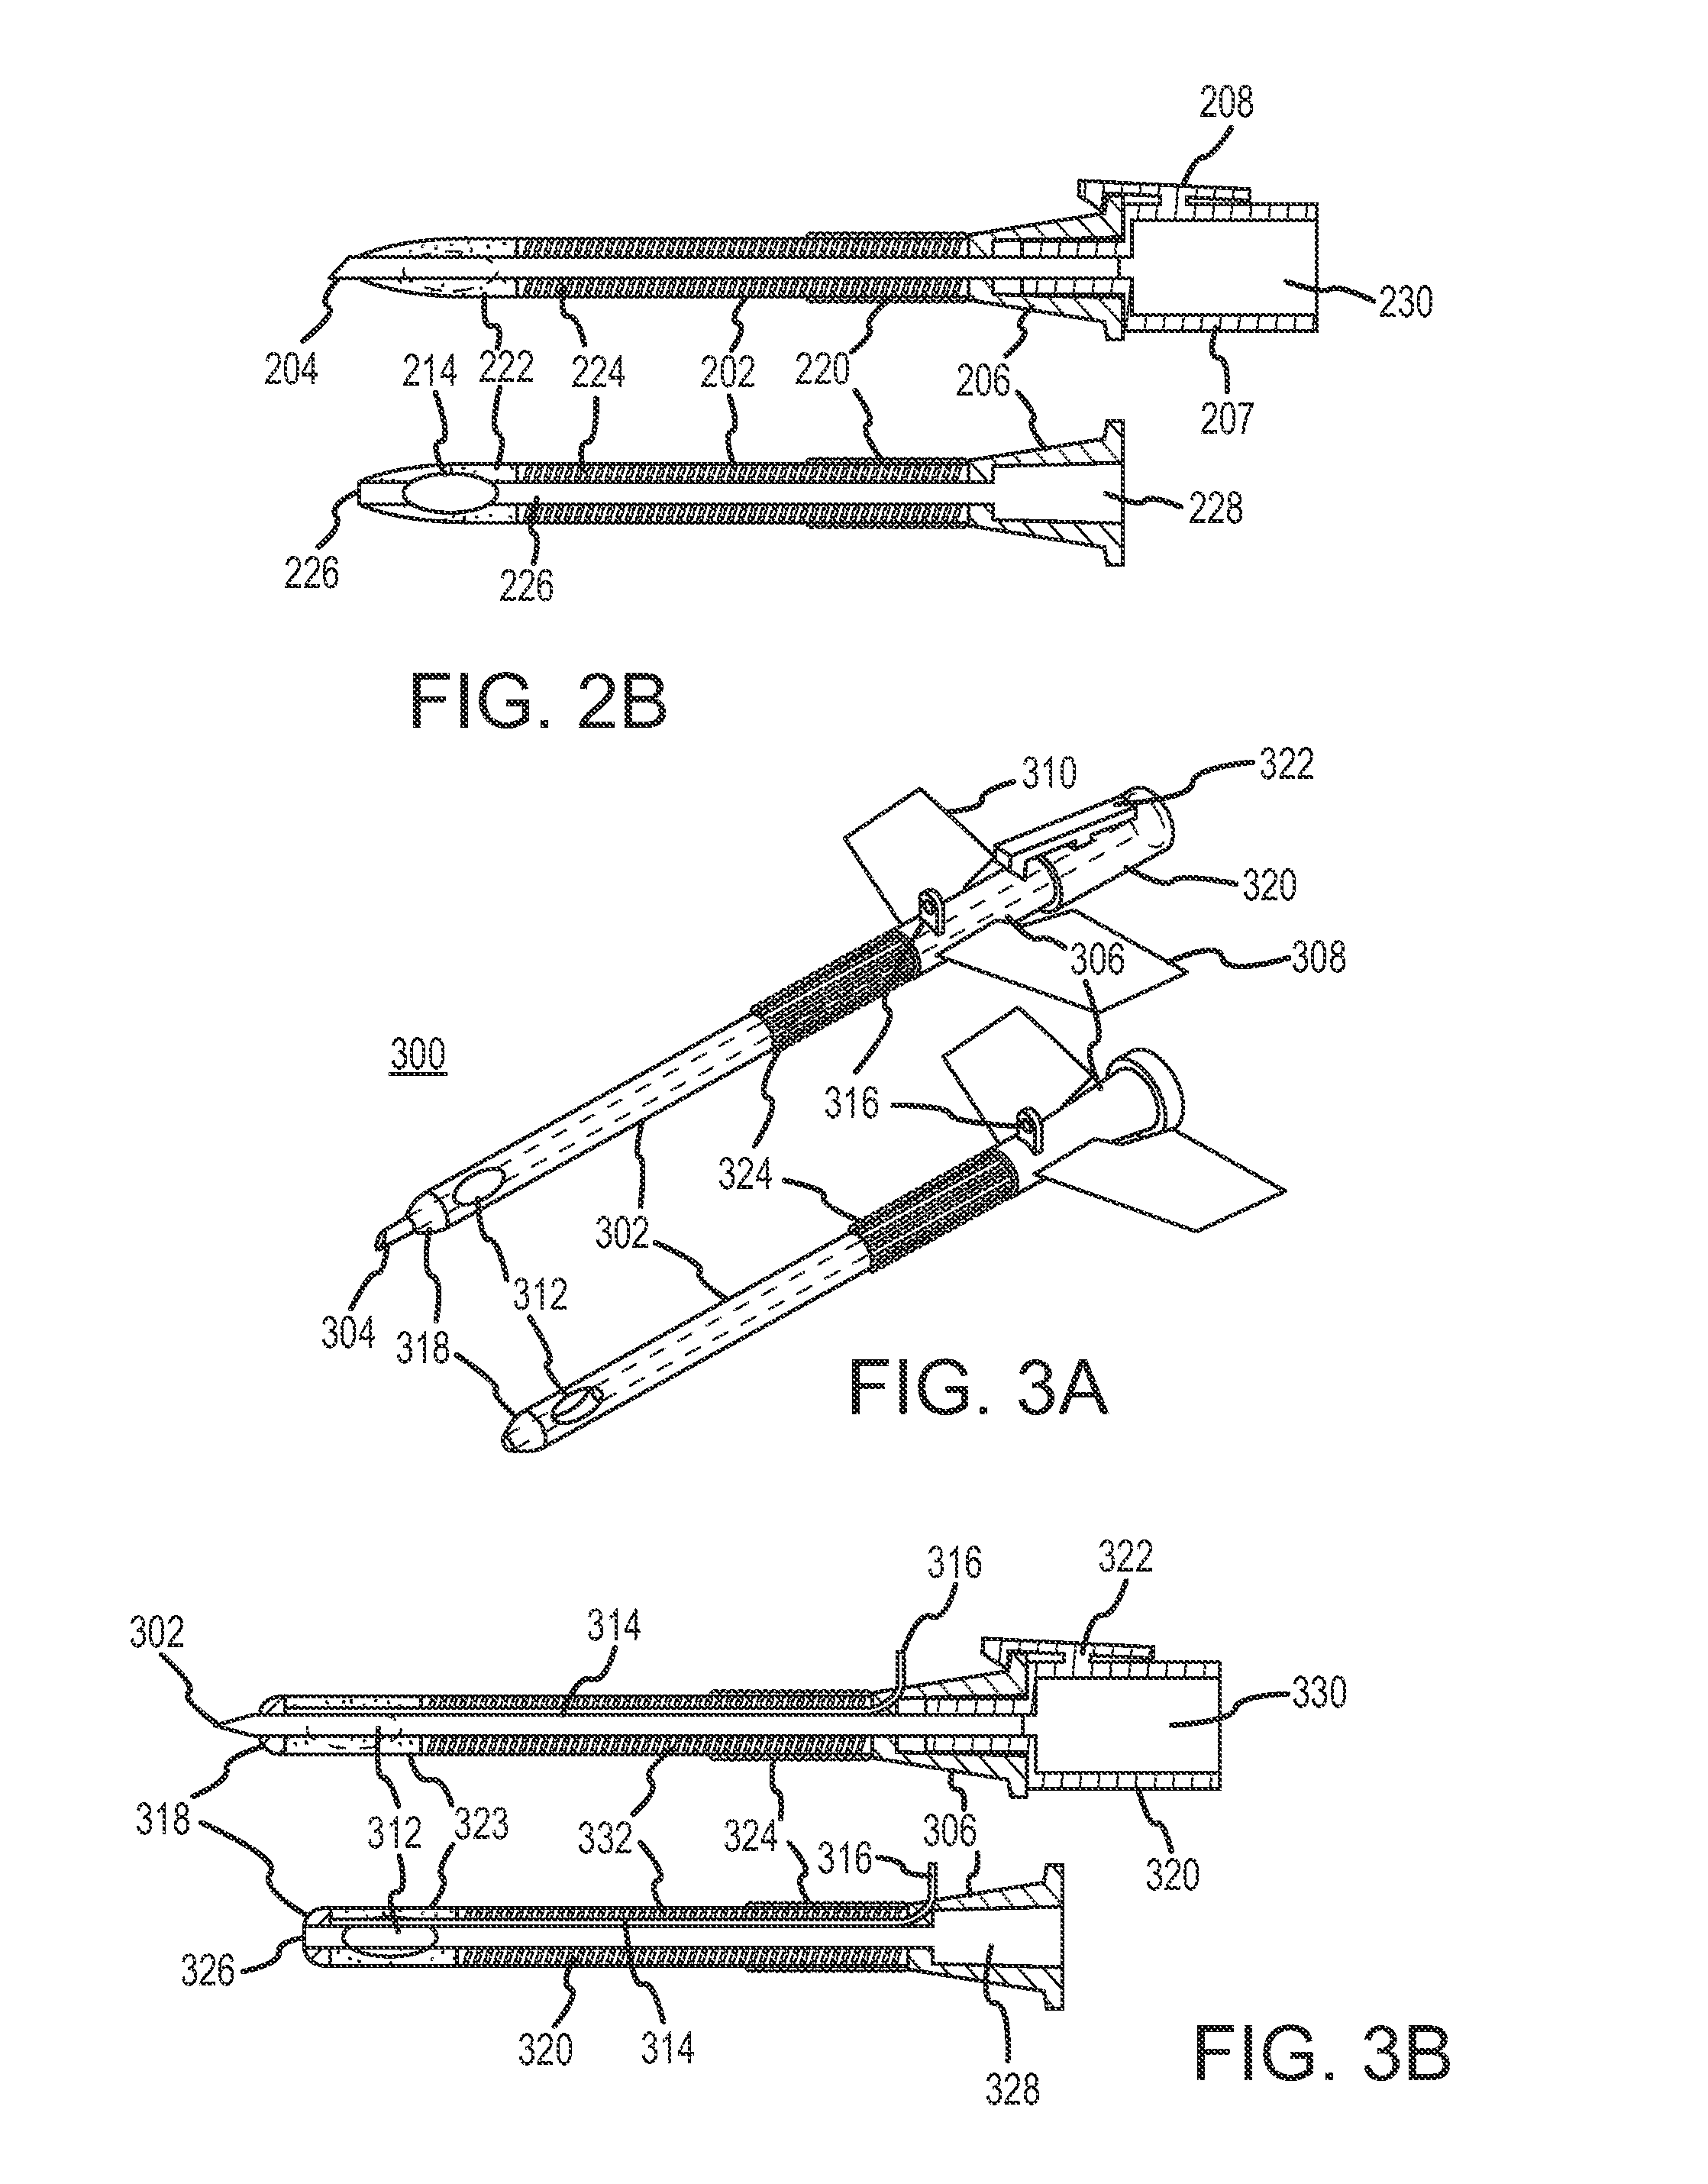 Continuous anesthesia nerve conduction apparatus and method